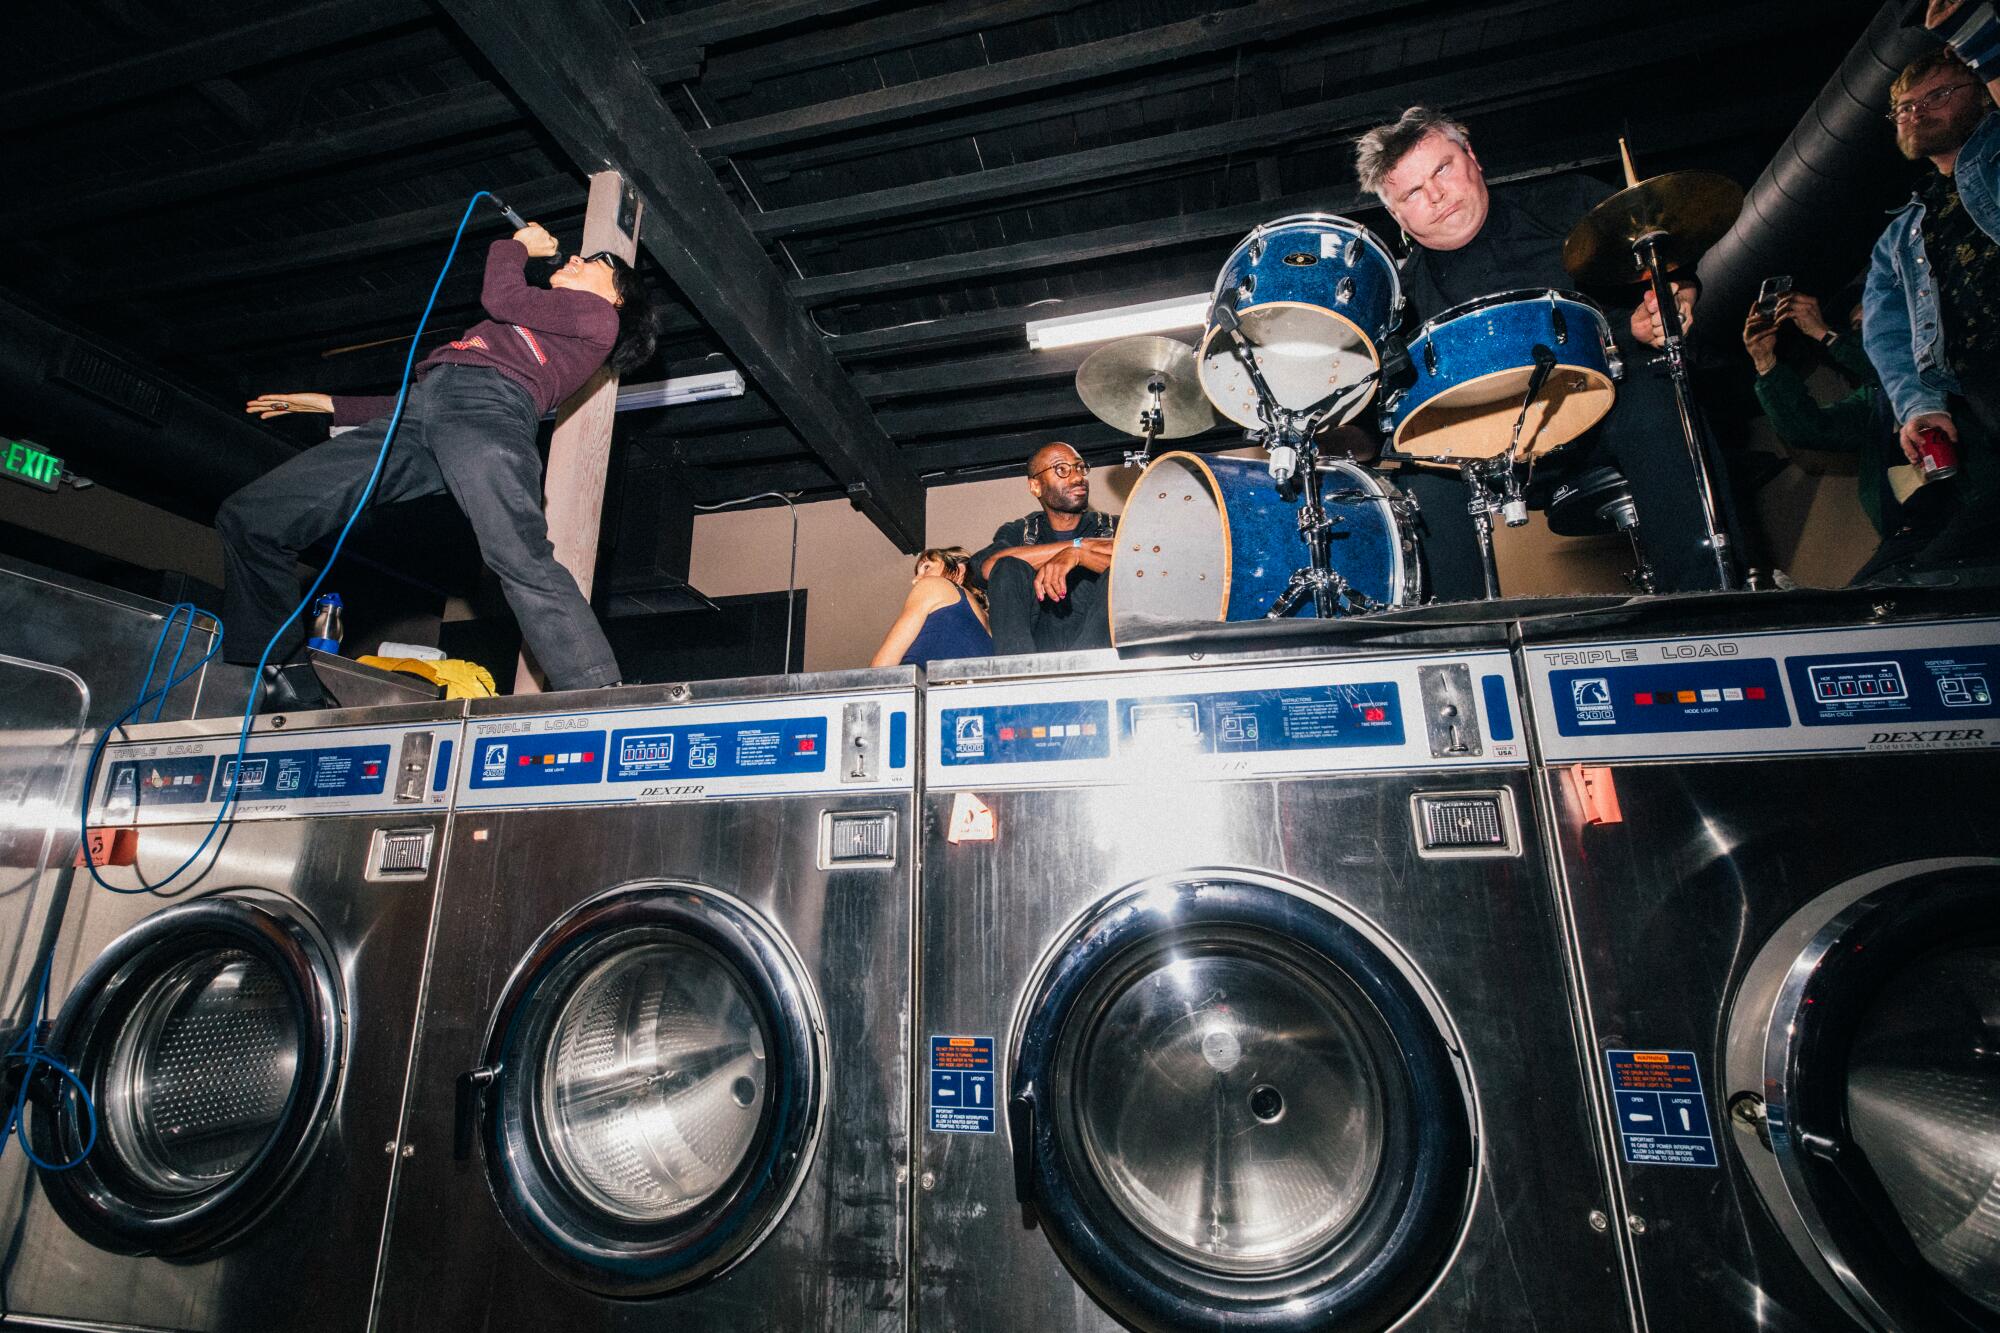 Musicians perform on top of a row of washing machines in a laundromat.